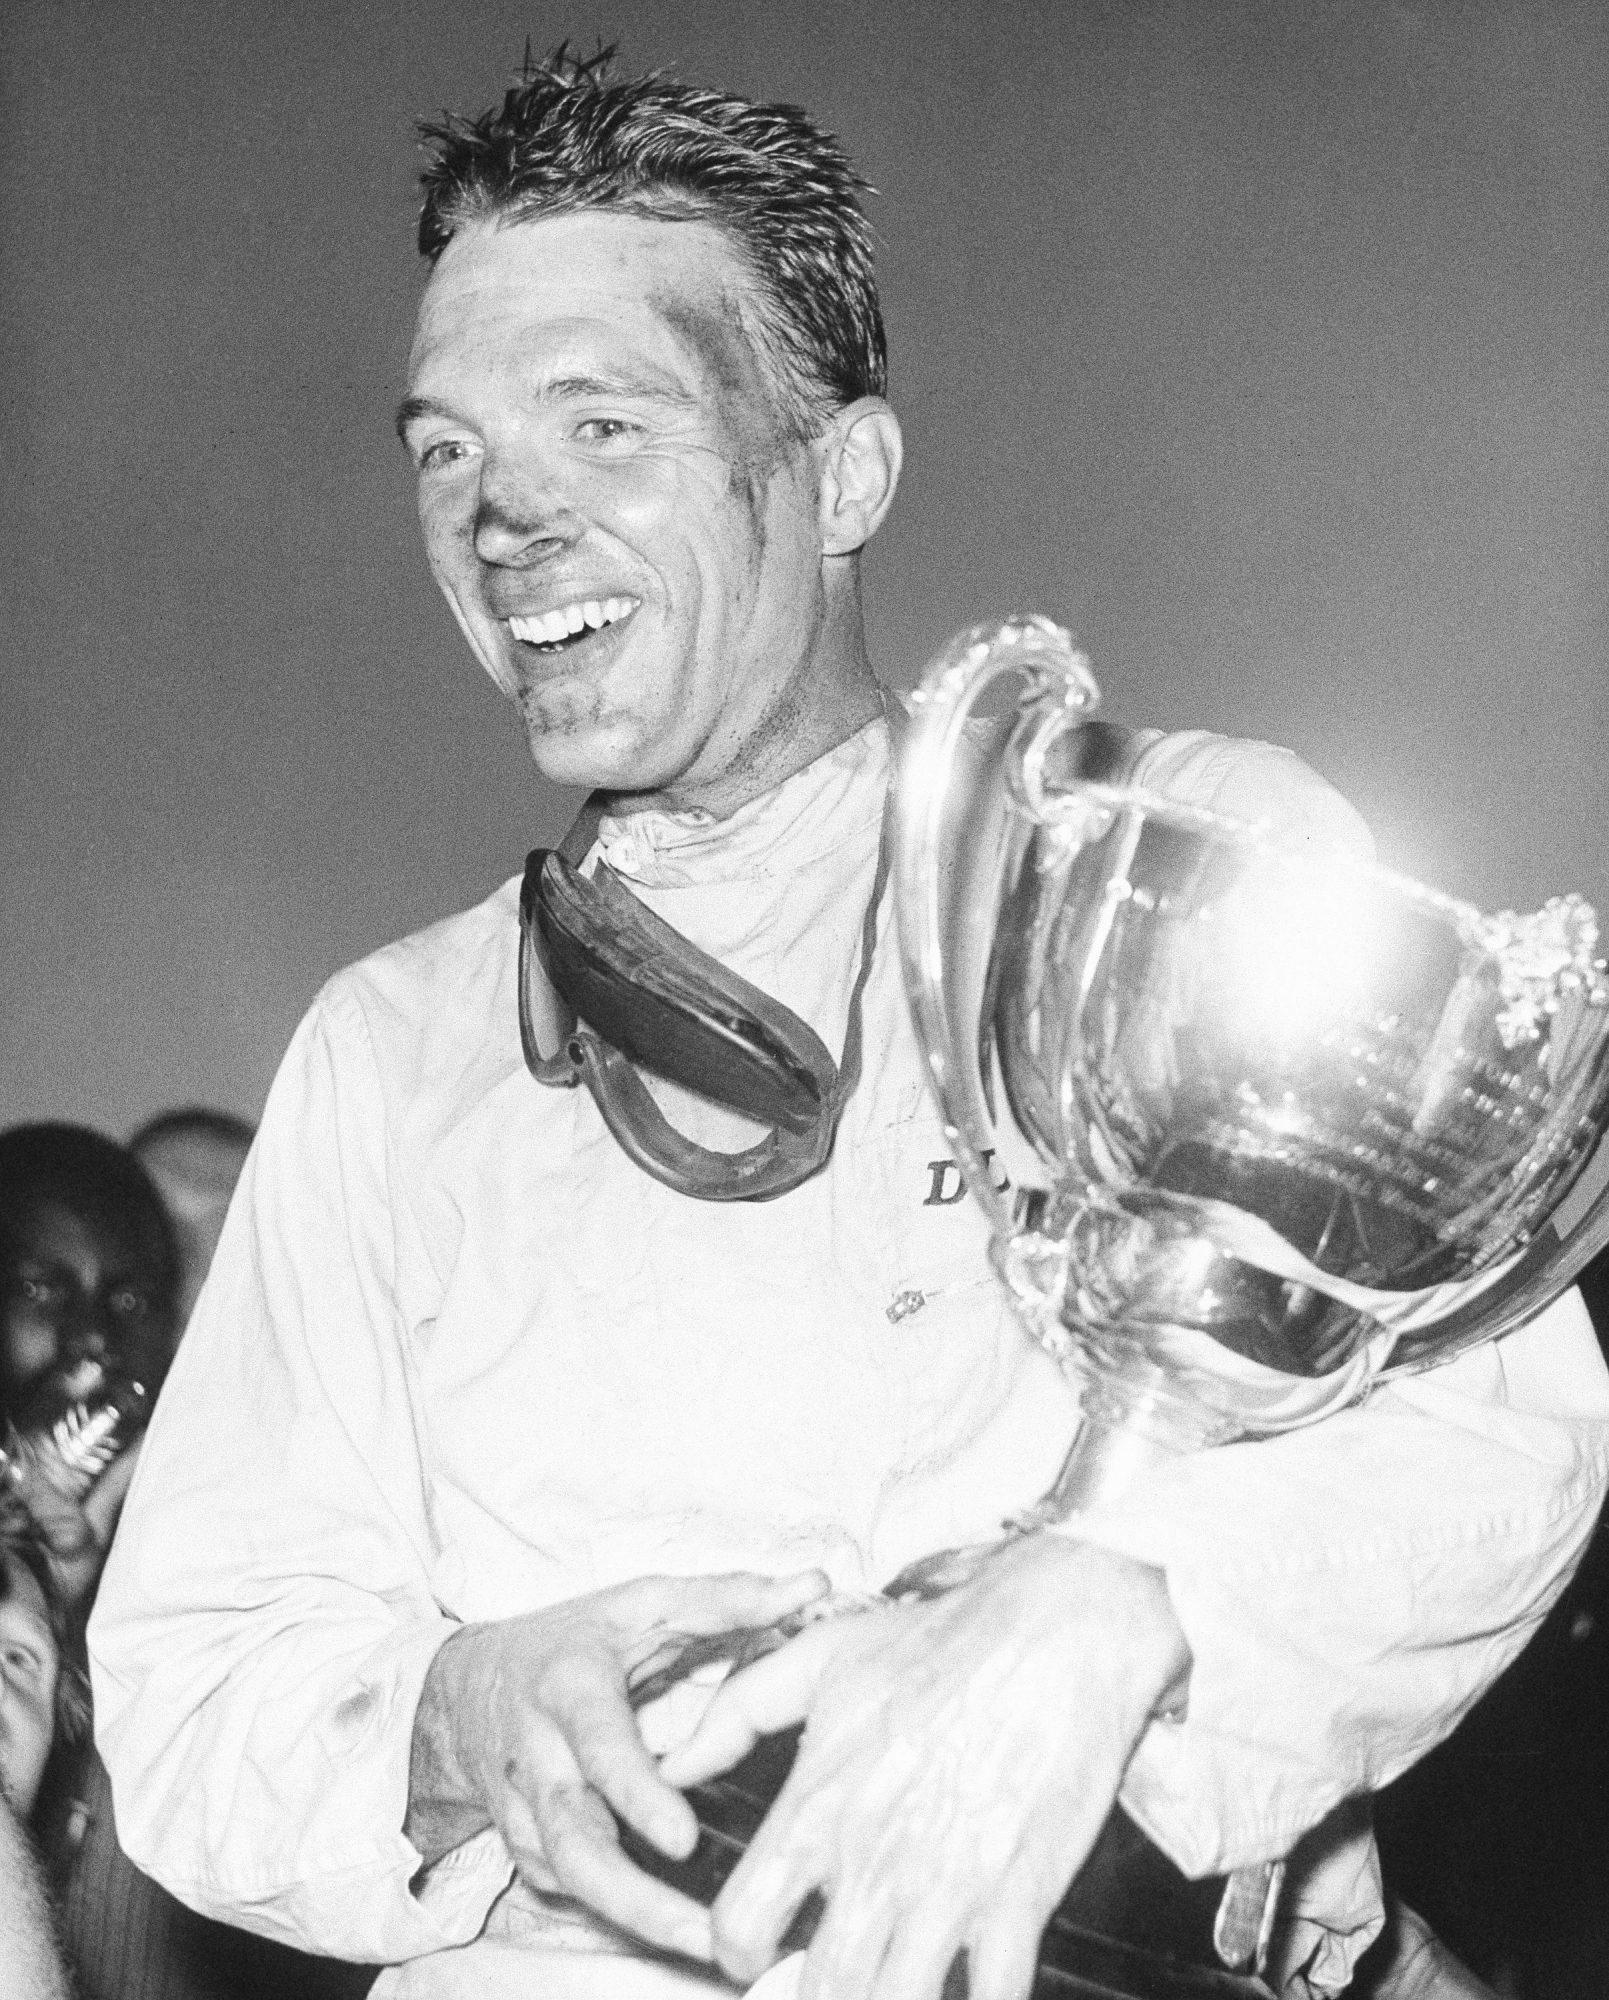 FILE - This Dec. 9, 1962 file photo shows Dan Gurney holding a trophy in Nassau, Bahamas. Gurney, the first driver to win in Formula One, IndyCar and NASCAR, died Sunday, Jan. 14, 2018 from complications of pneumonia. He was 86. His wife, Evi, announced his death in a statement distributed by All American Racers, Inc. (AP Photo) OBIT-GURNEY